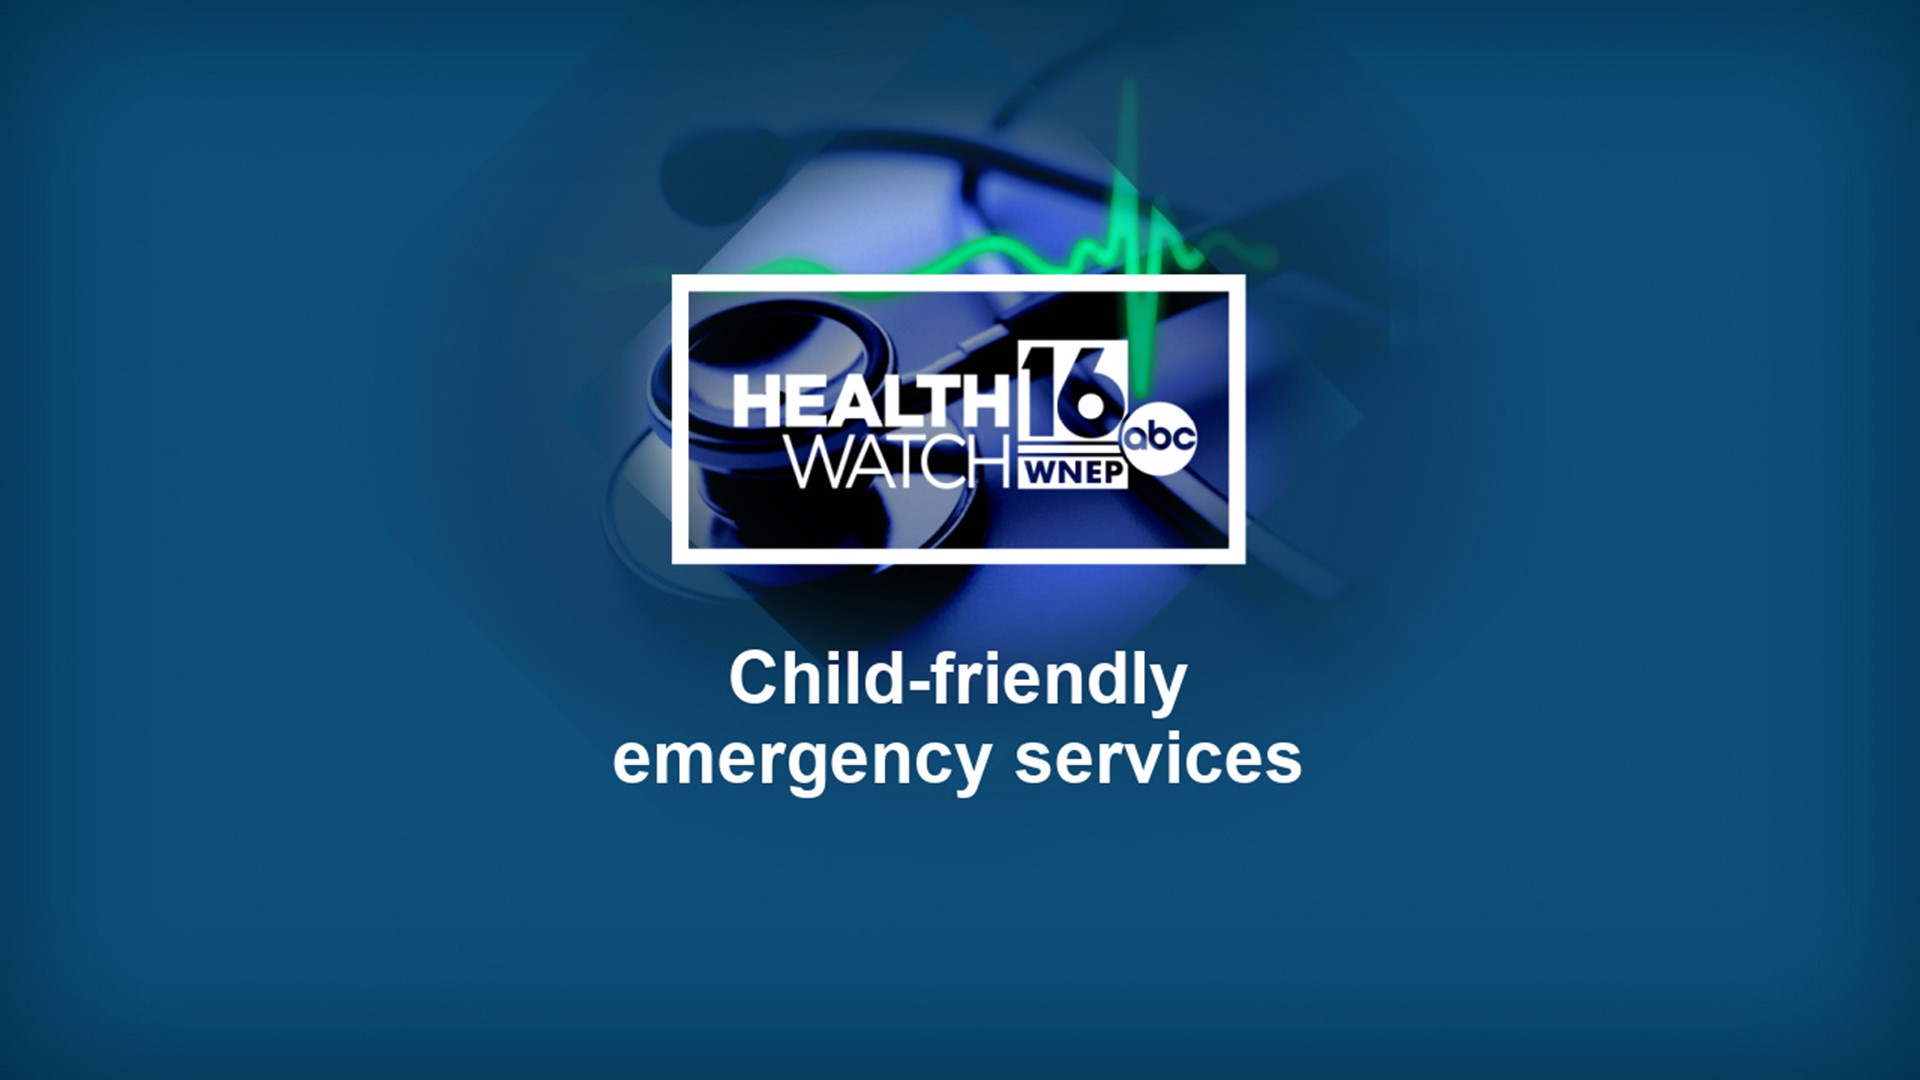 It can be scary for an adult to visit an emergency room. Now imagine that visit from the eyes of child.